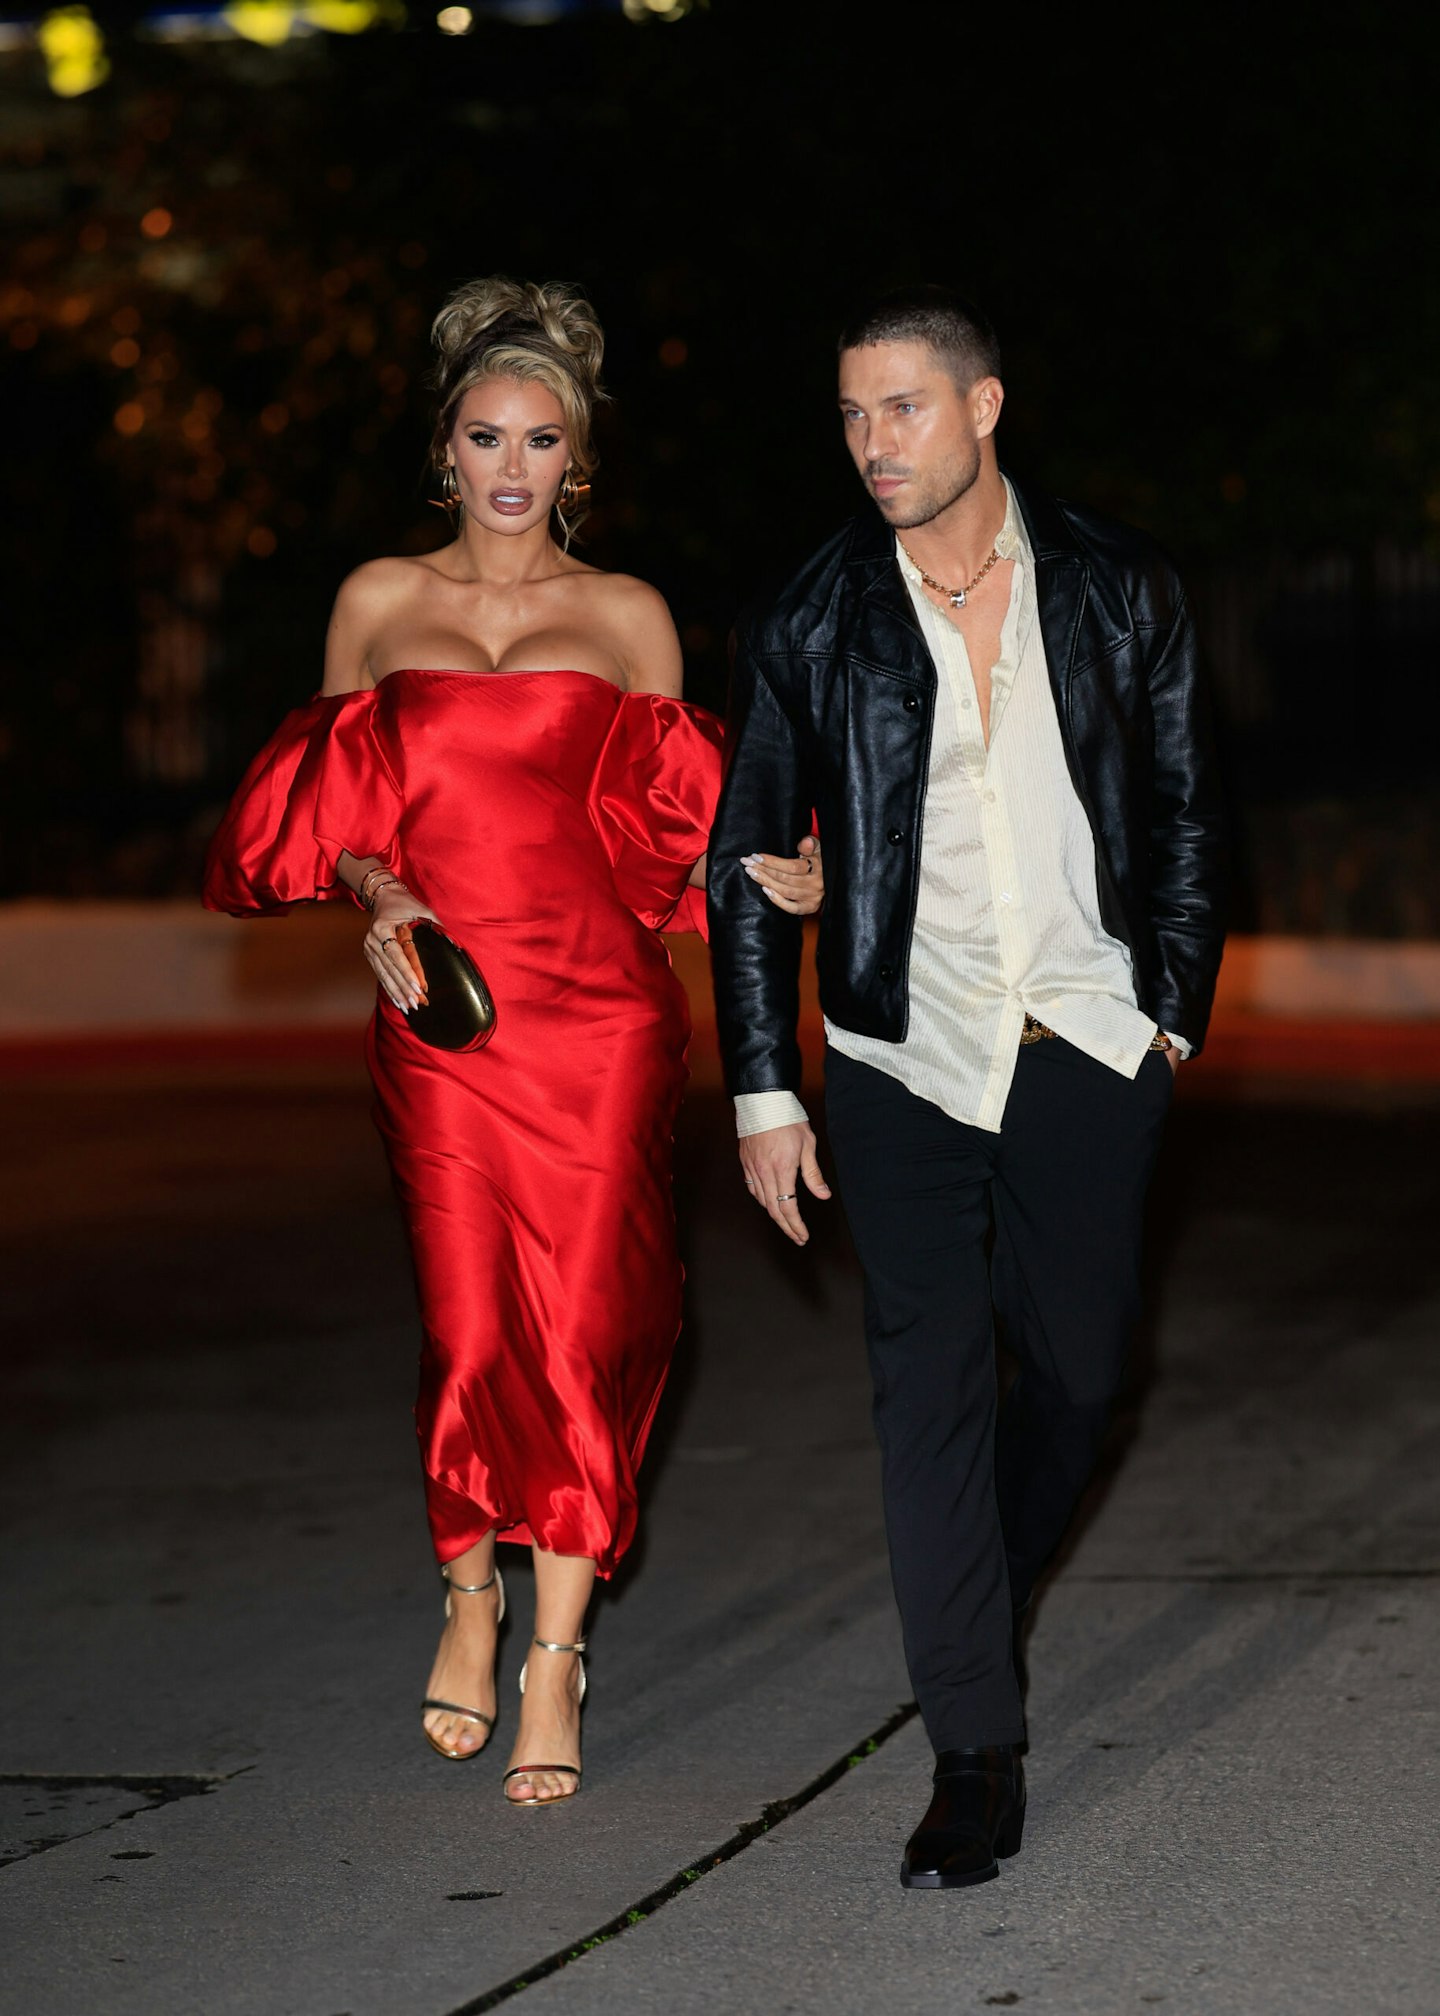 Chloe Sims and Joey Essex